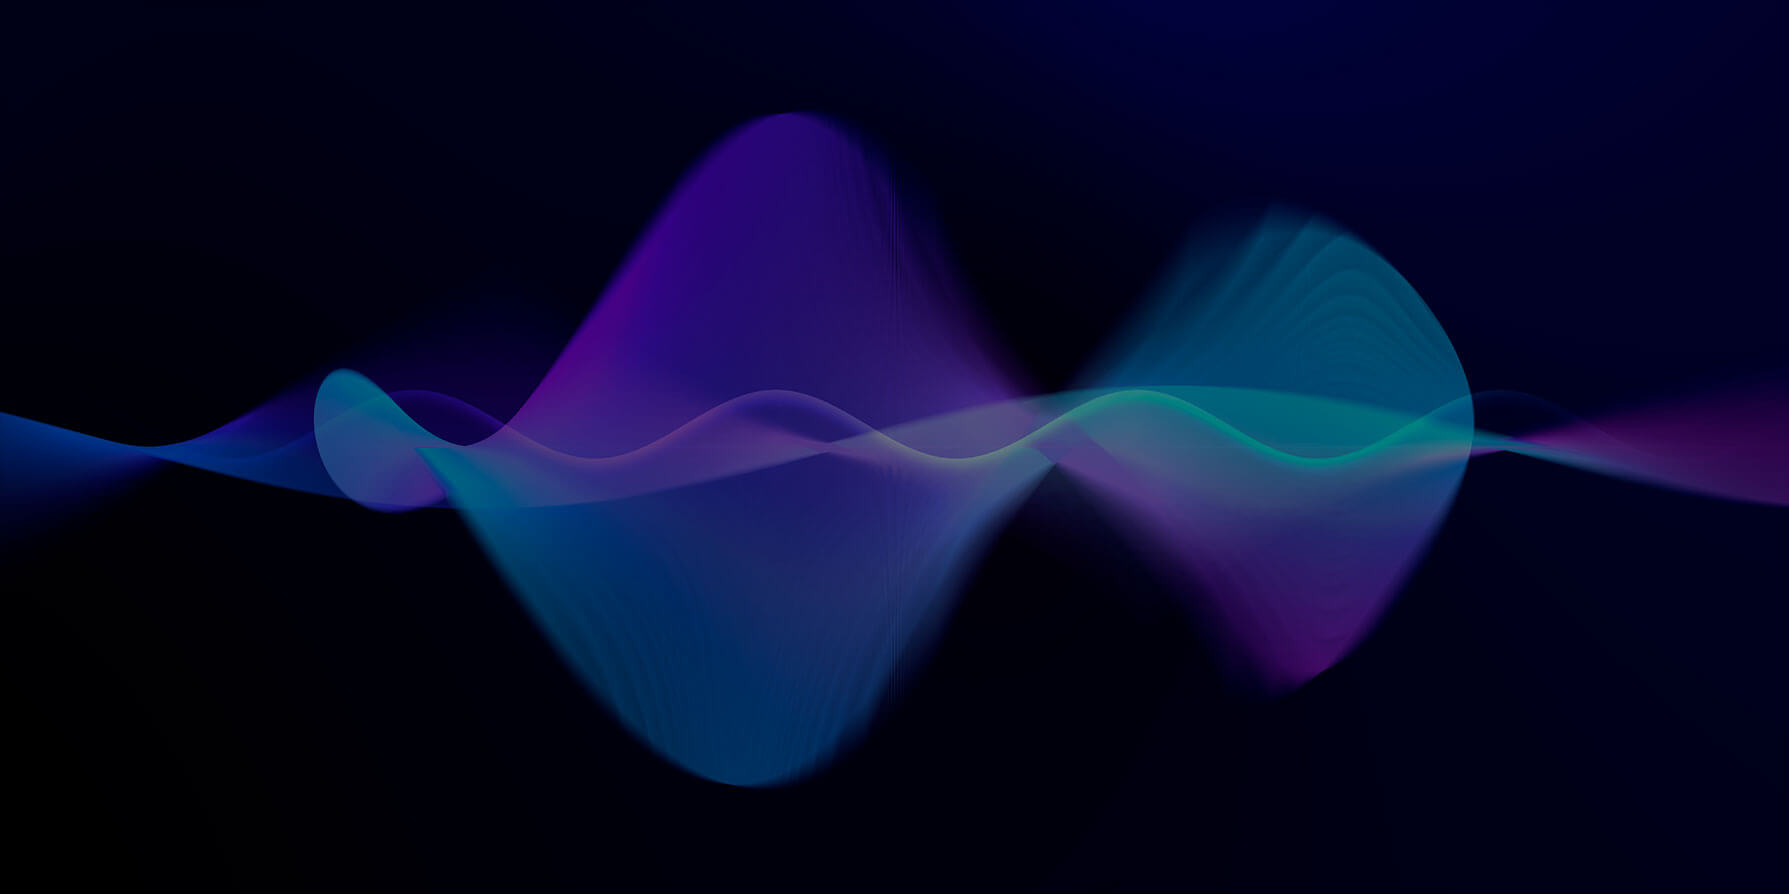 The audio element as background to demonstrate noise reduction solution